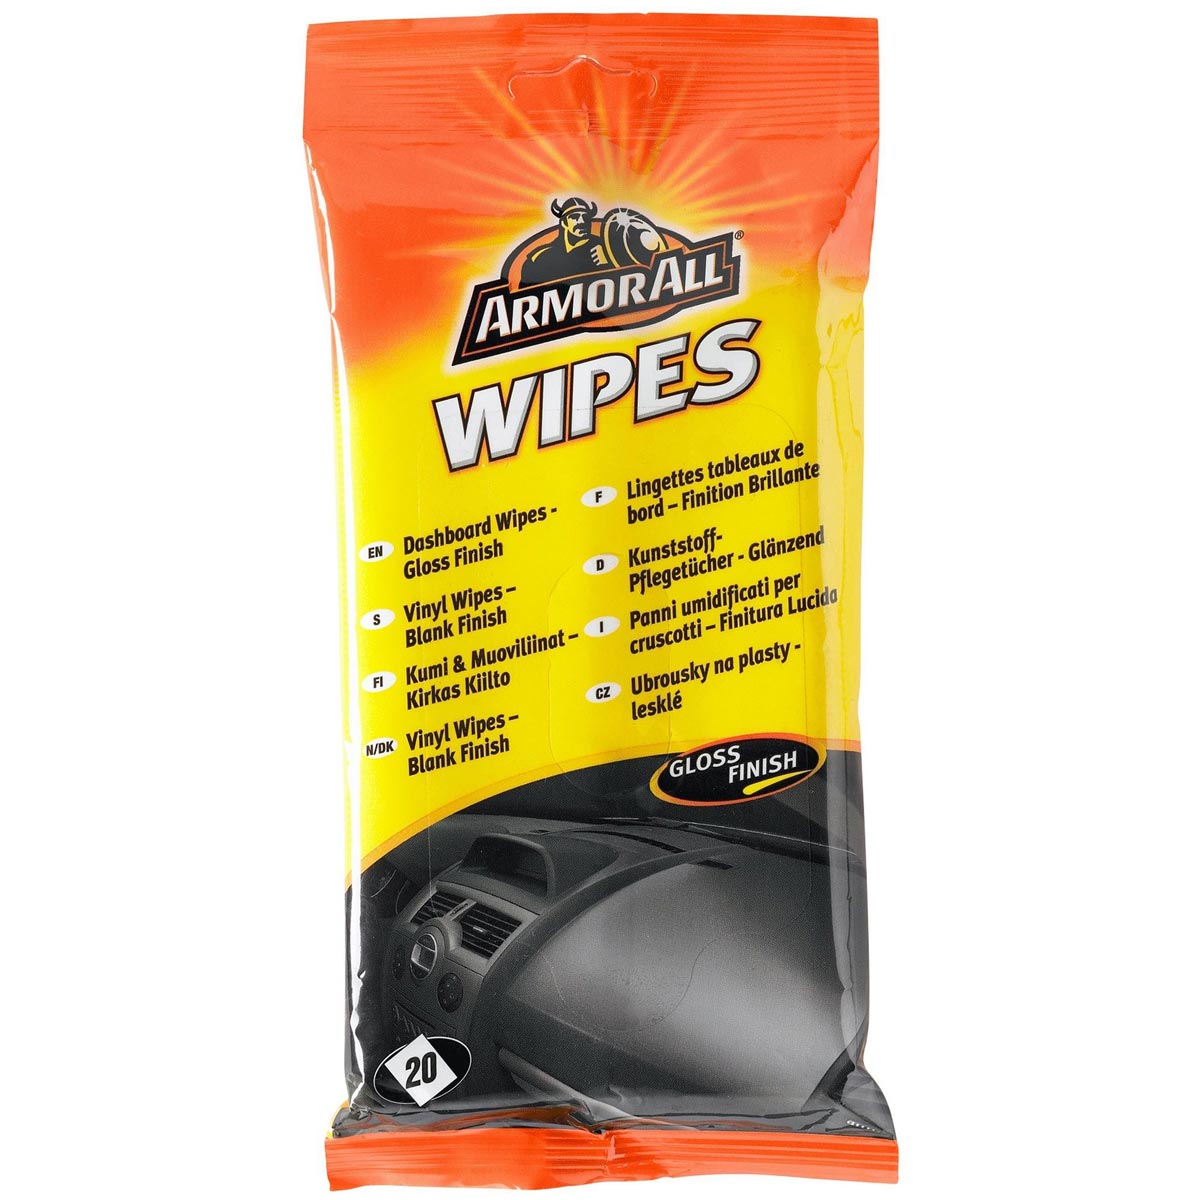 Armor All Gloss Finish Dashboard Wipes - 20 Pack